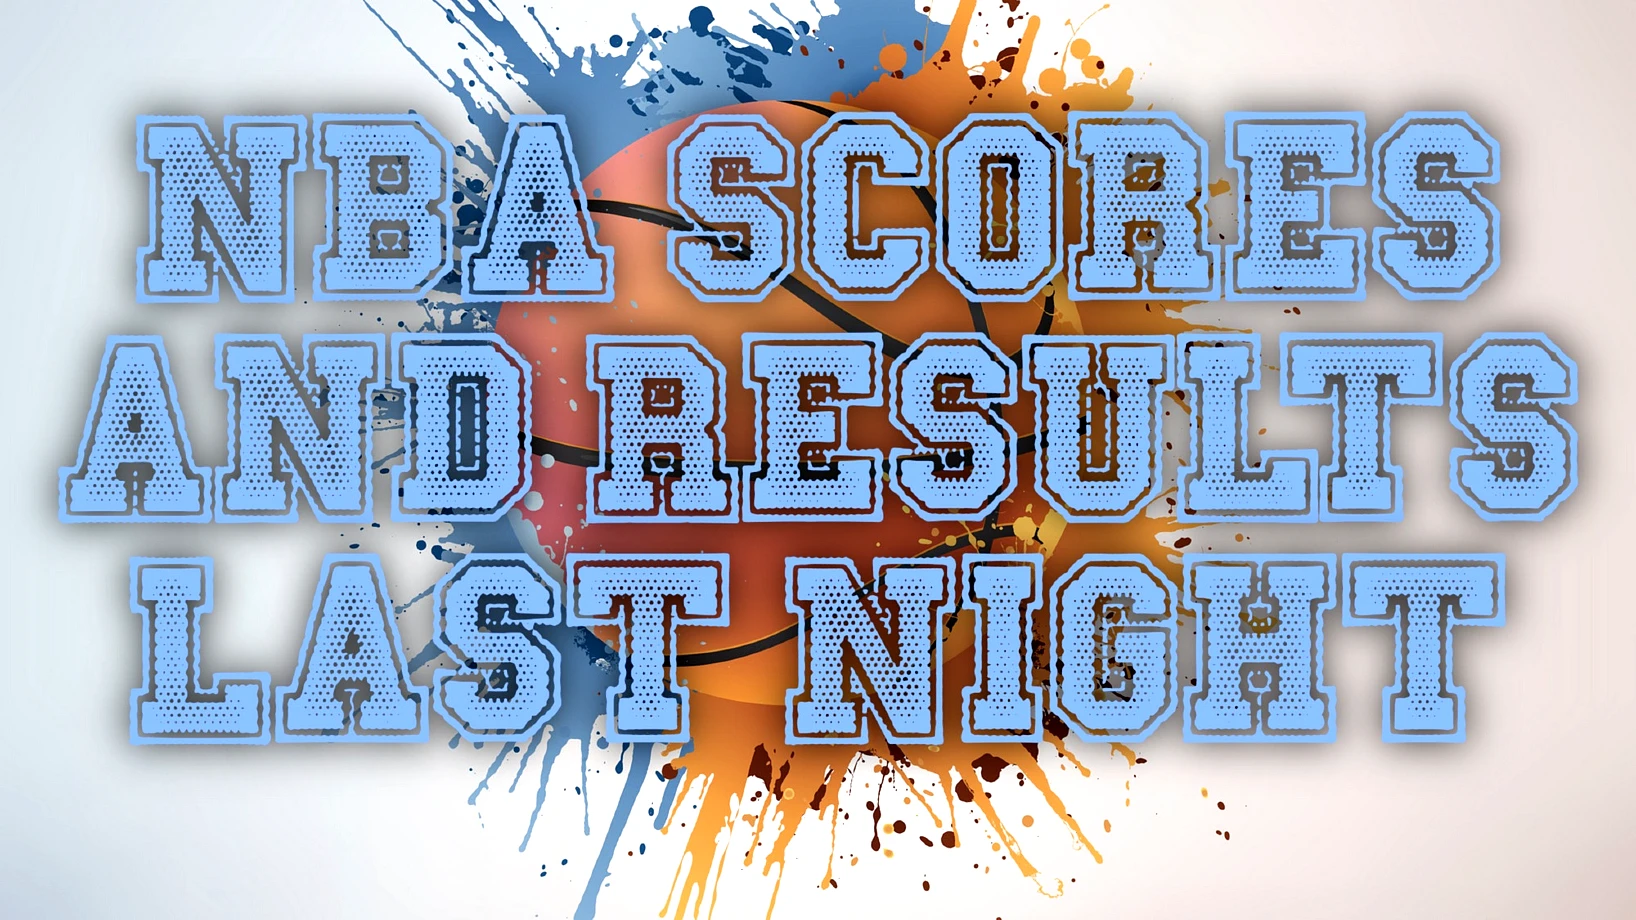 NBA Scores and Results From Last Night's Action